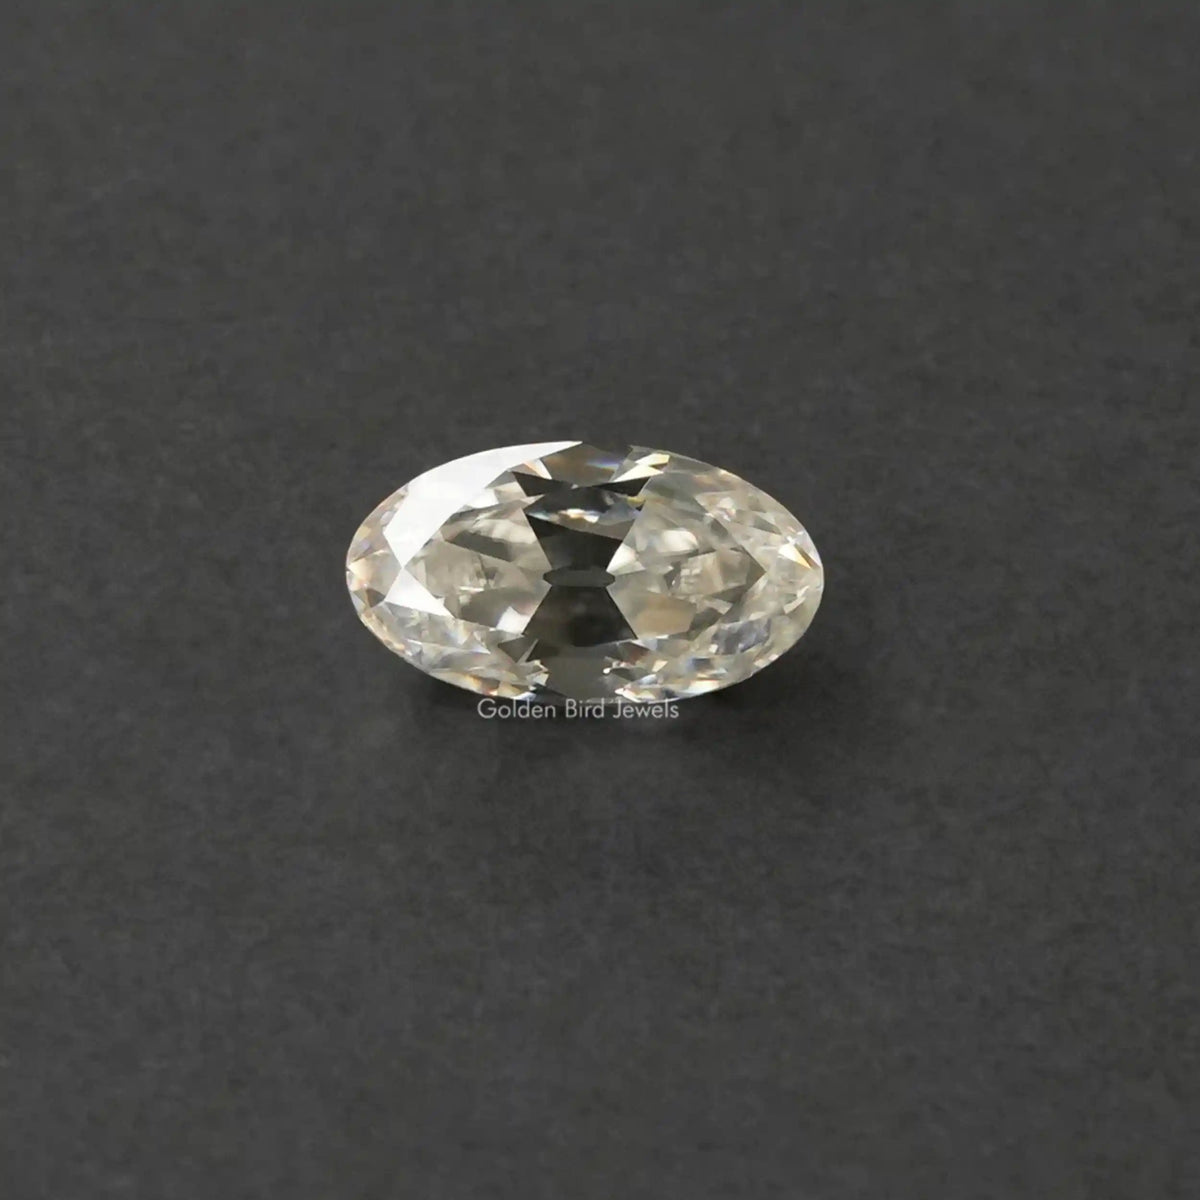 [Front view of 3.40 carat old mine moval cut loose moissanite]-[Golden Bird Jewels]